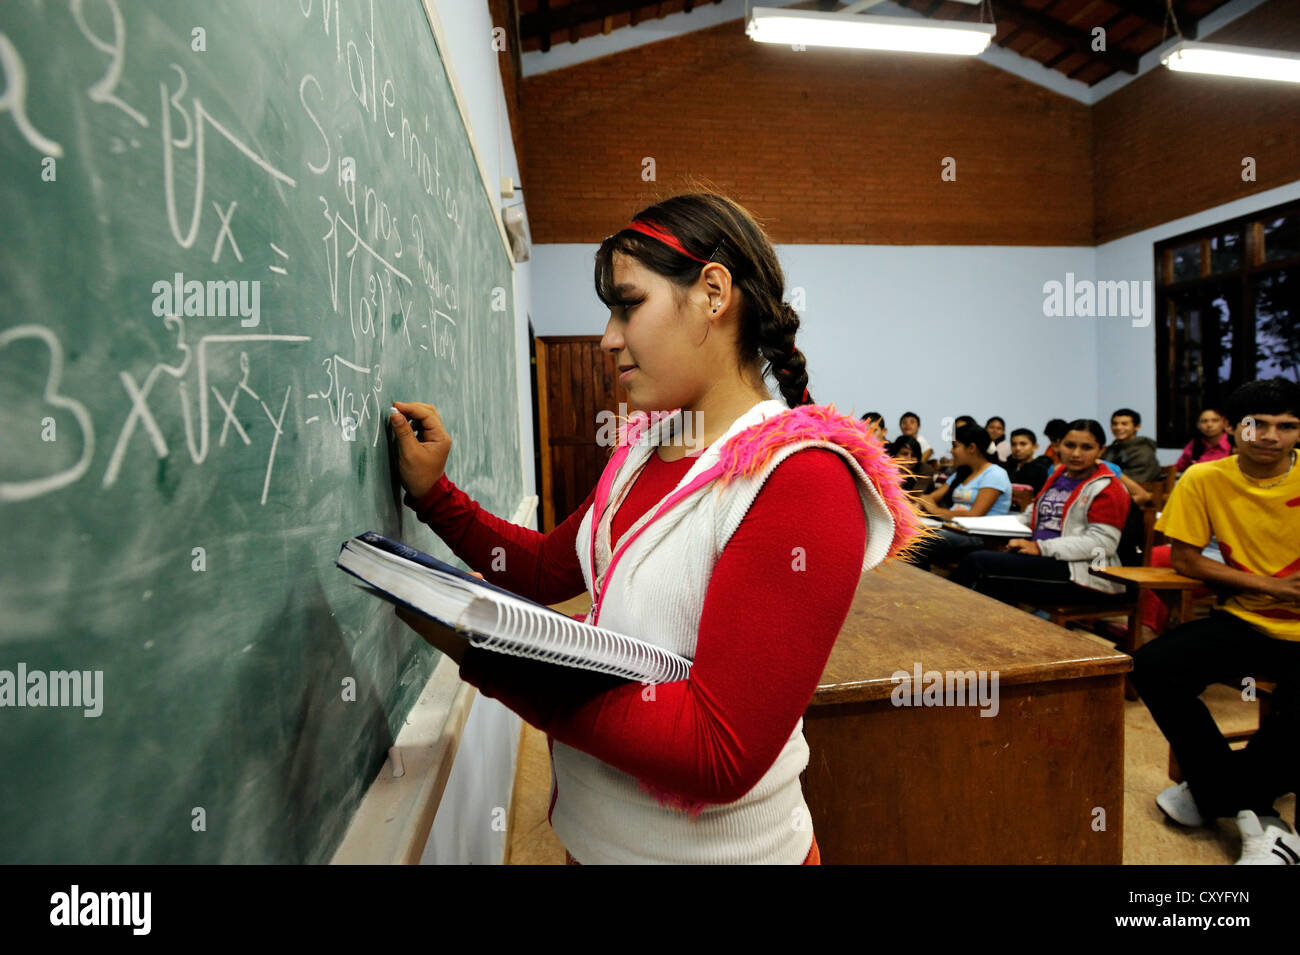 Student solving a math equation, equation on a blackboard, lessons at the agricultural college CECTEC, Itapua, Paraguay Stock Photo